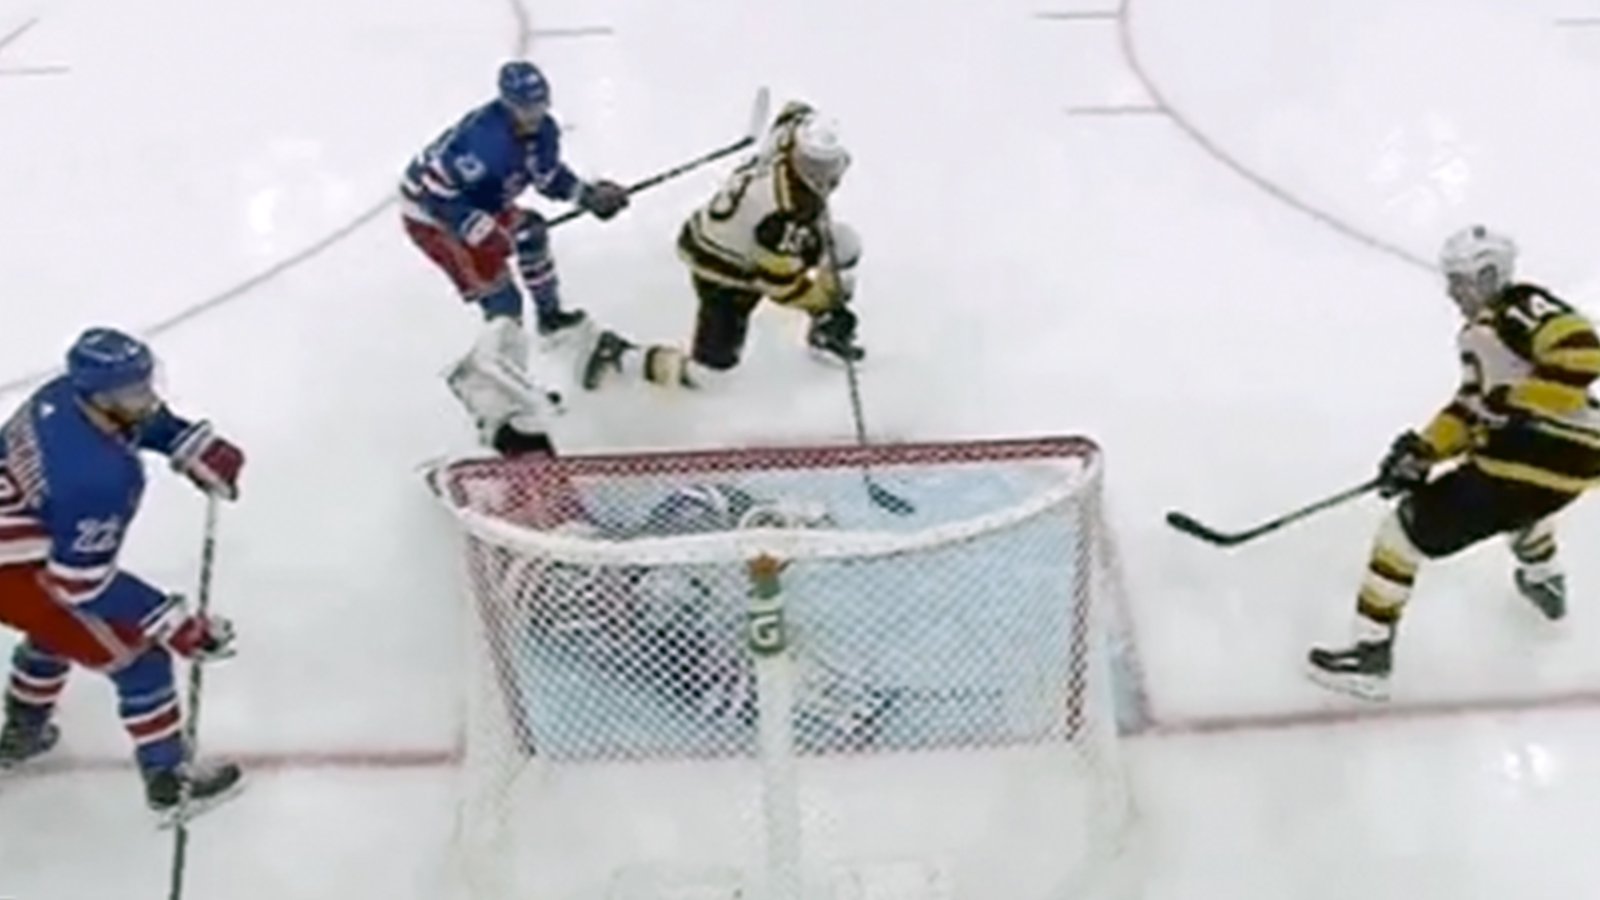 Lundqvist absolutely robs Bruins’ Wagner with a diving paddle save